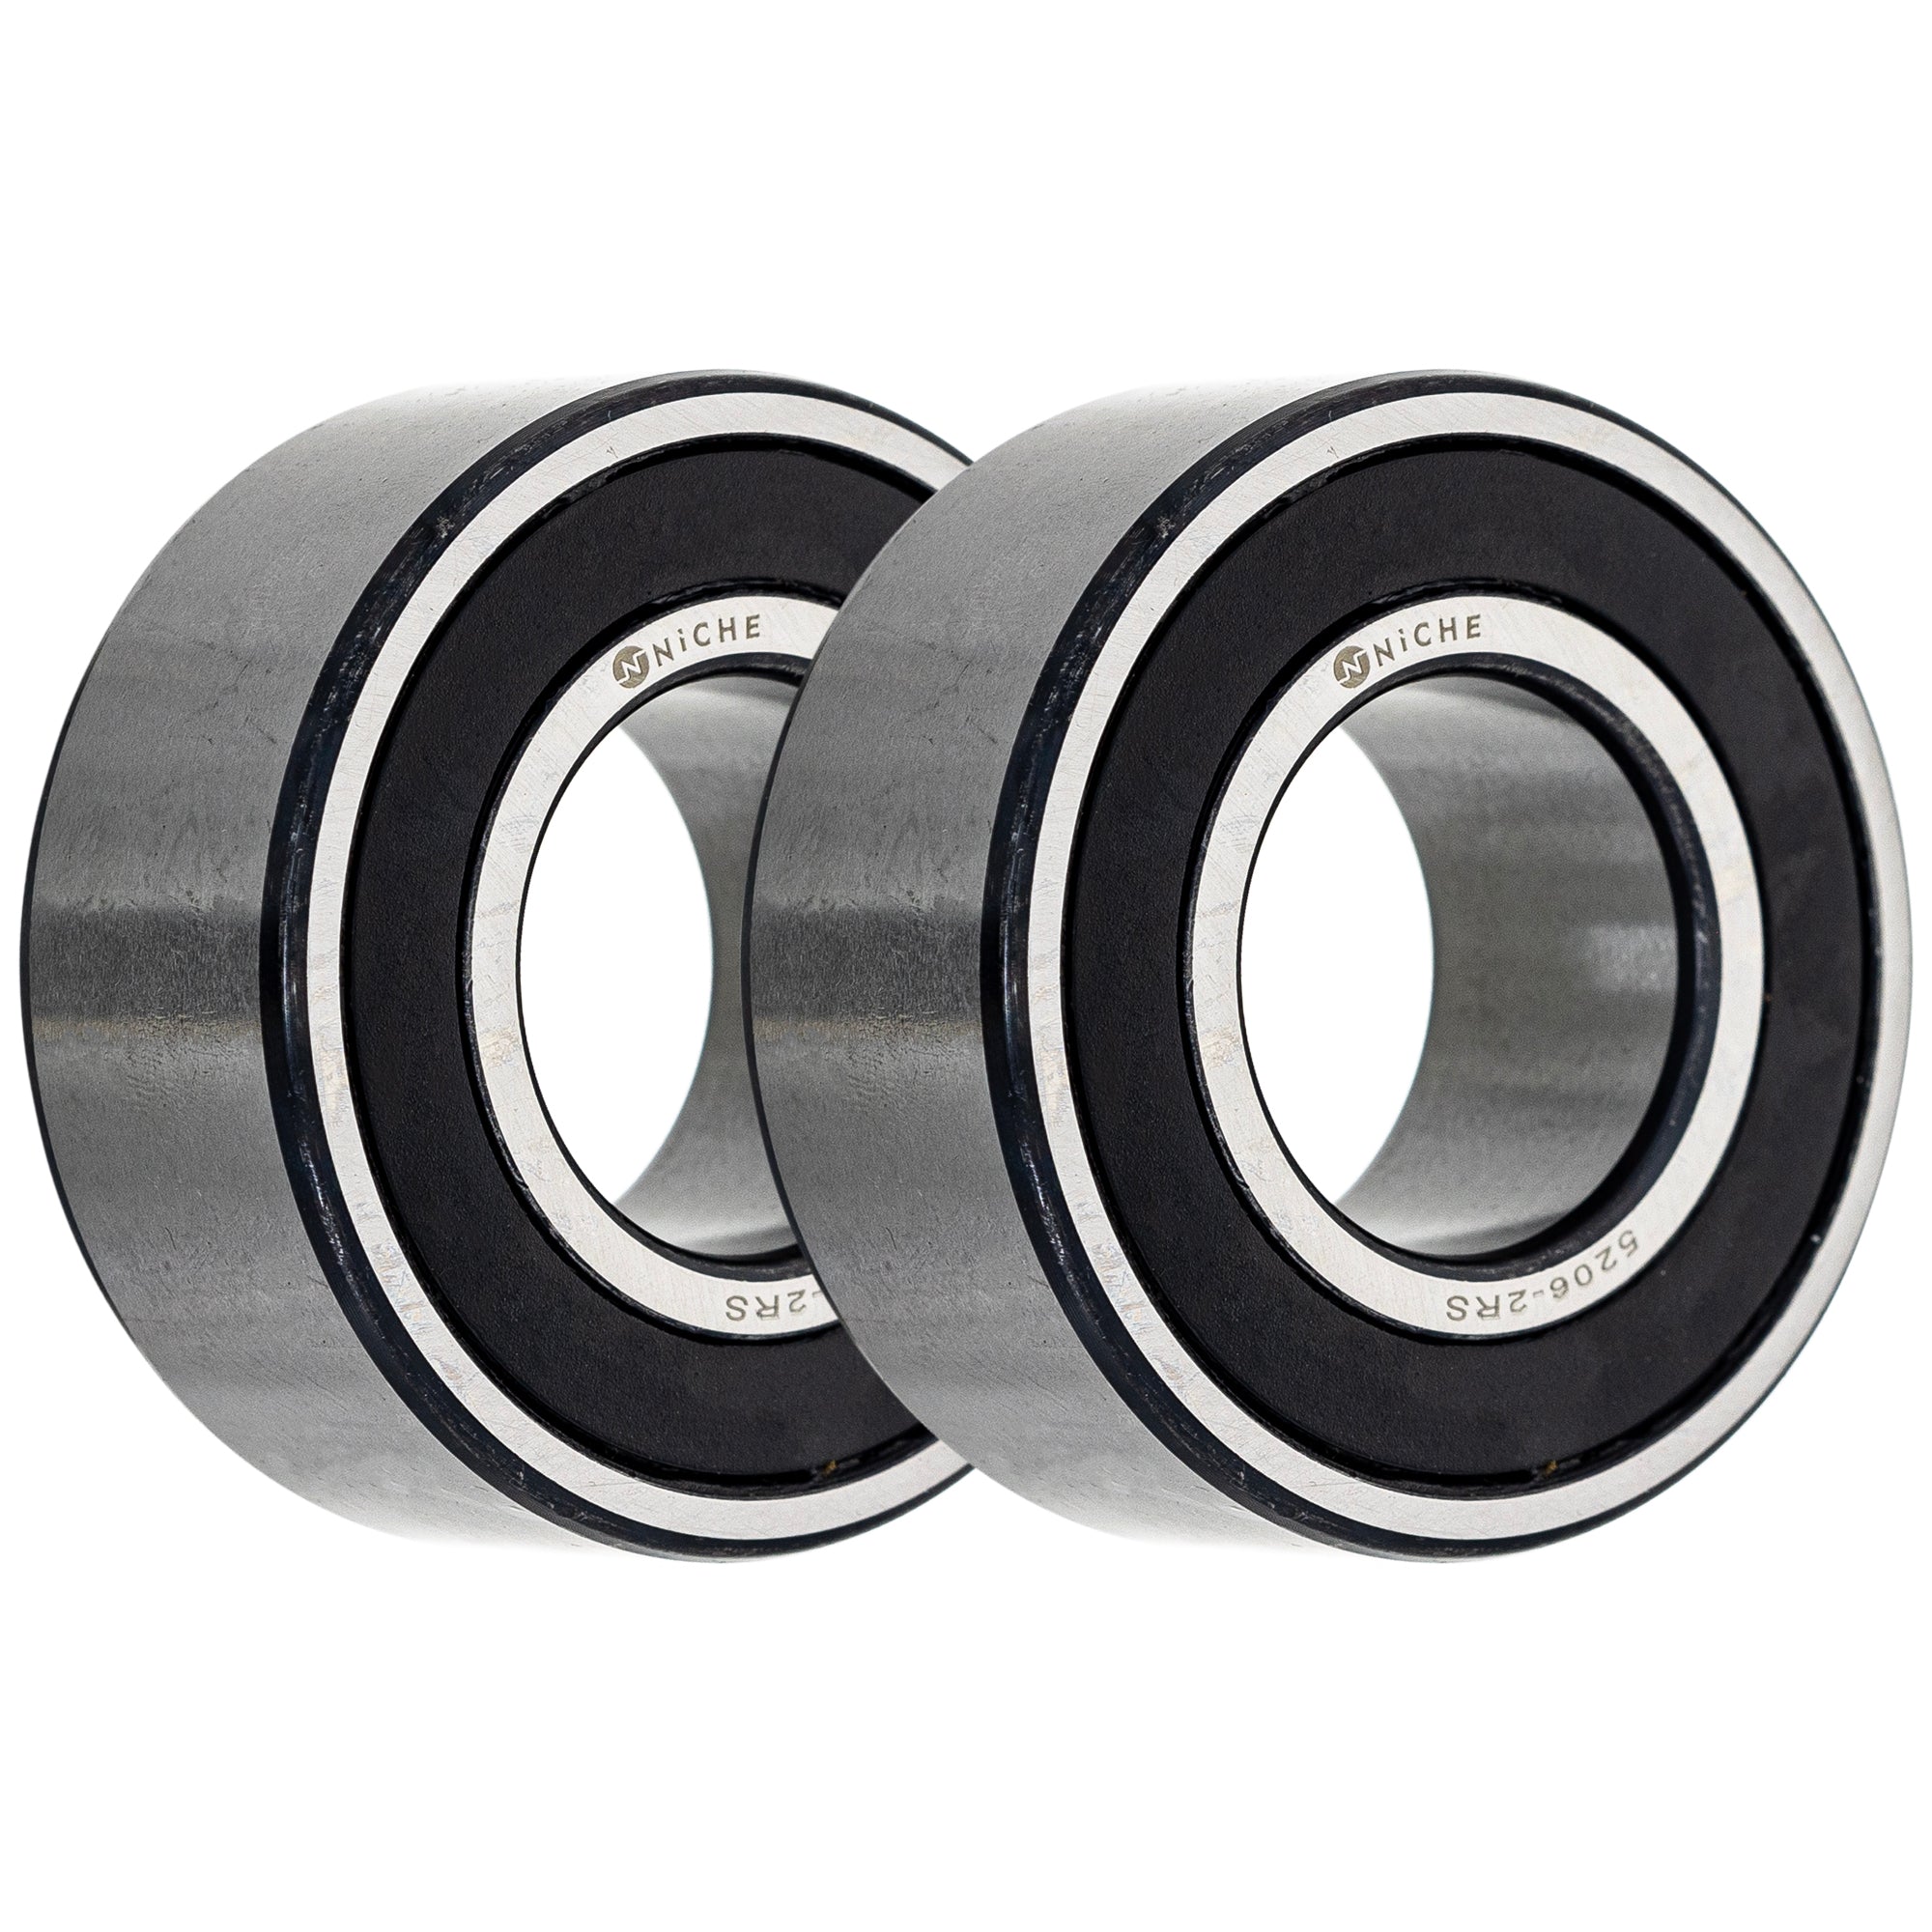 Angular Contact Bearing Pack of 2 2-Pack for zOTHER Valkyrie Super ST1300 ST1100 NICHE 519-CBB2266R